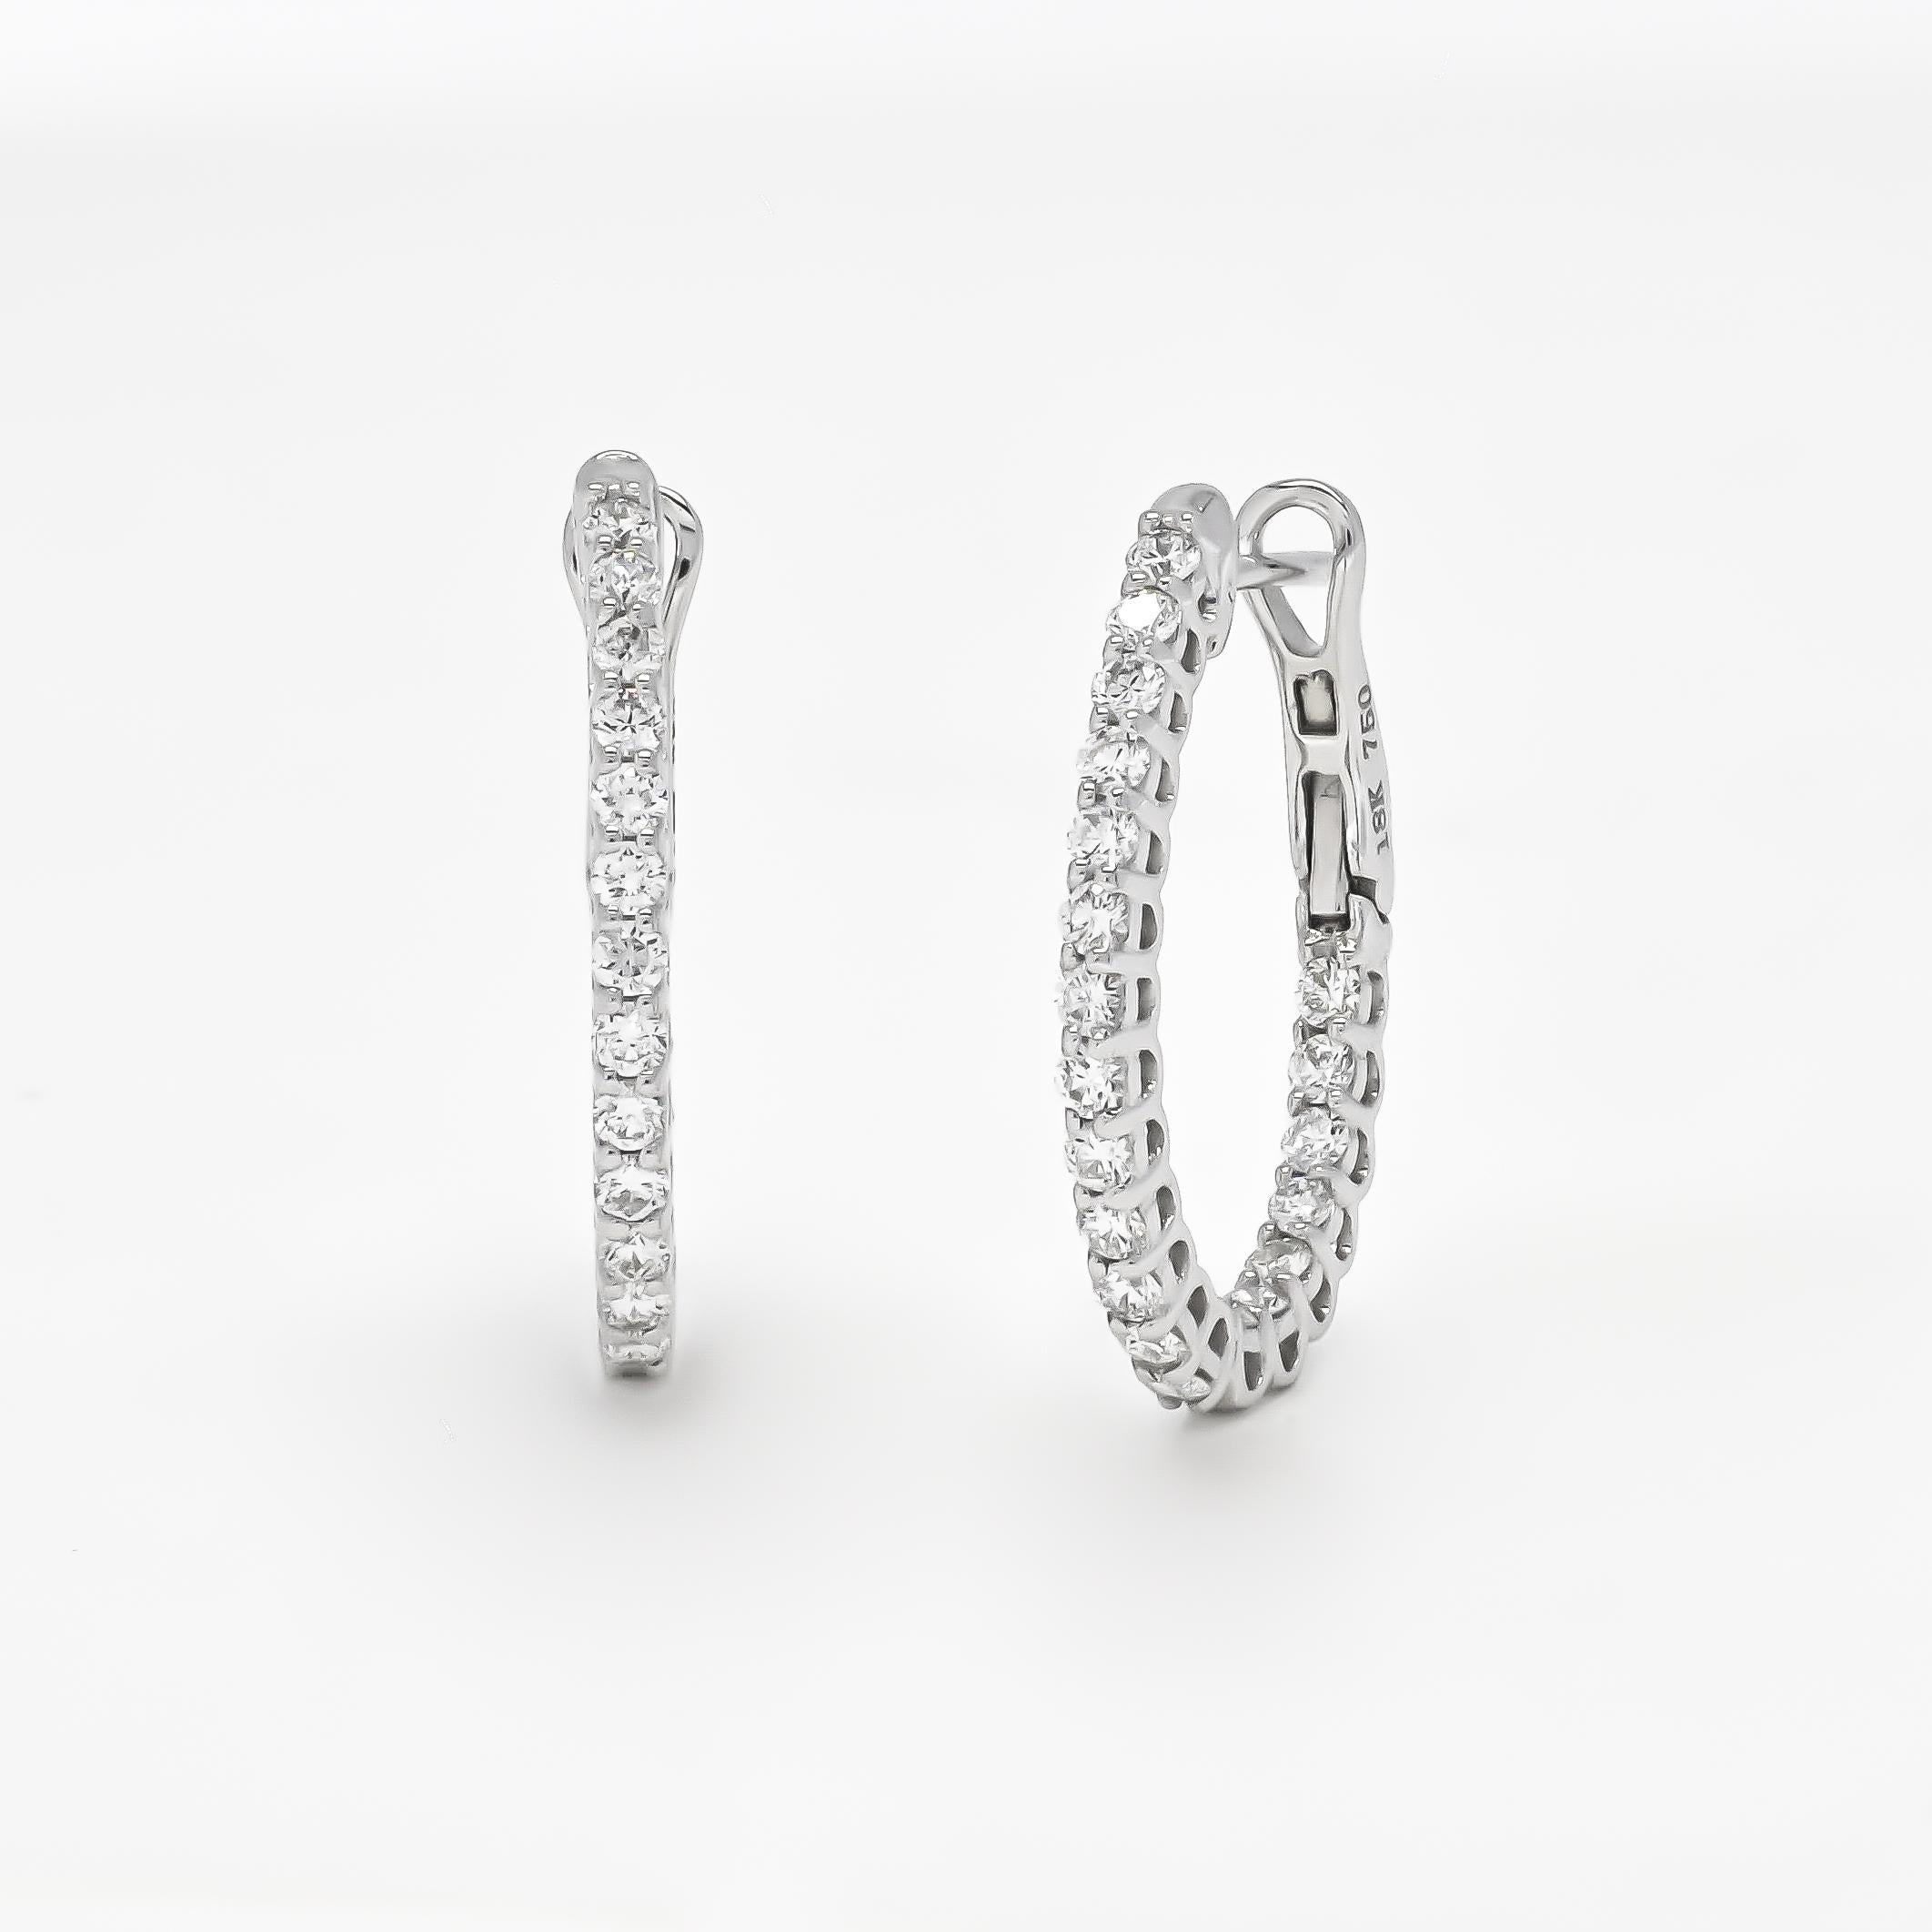 Round Cut Natural Diamond 1.02 Carats 18KT White Gold 'In and out' Hoop Earrings For Sale